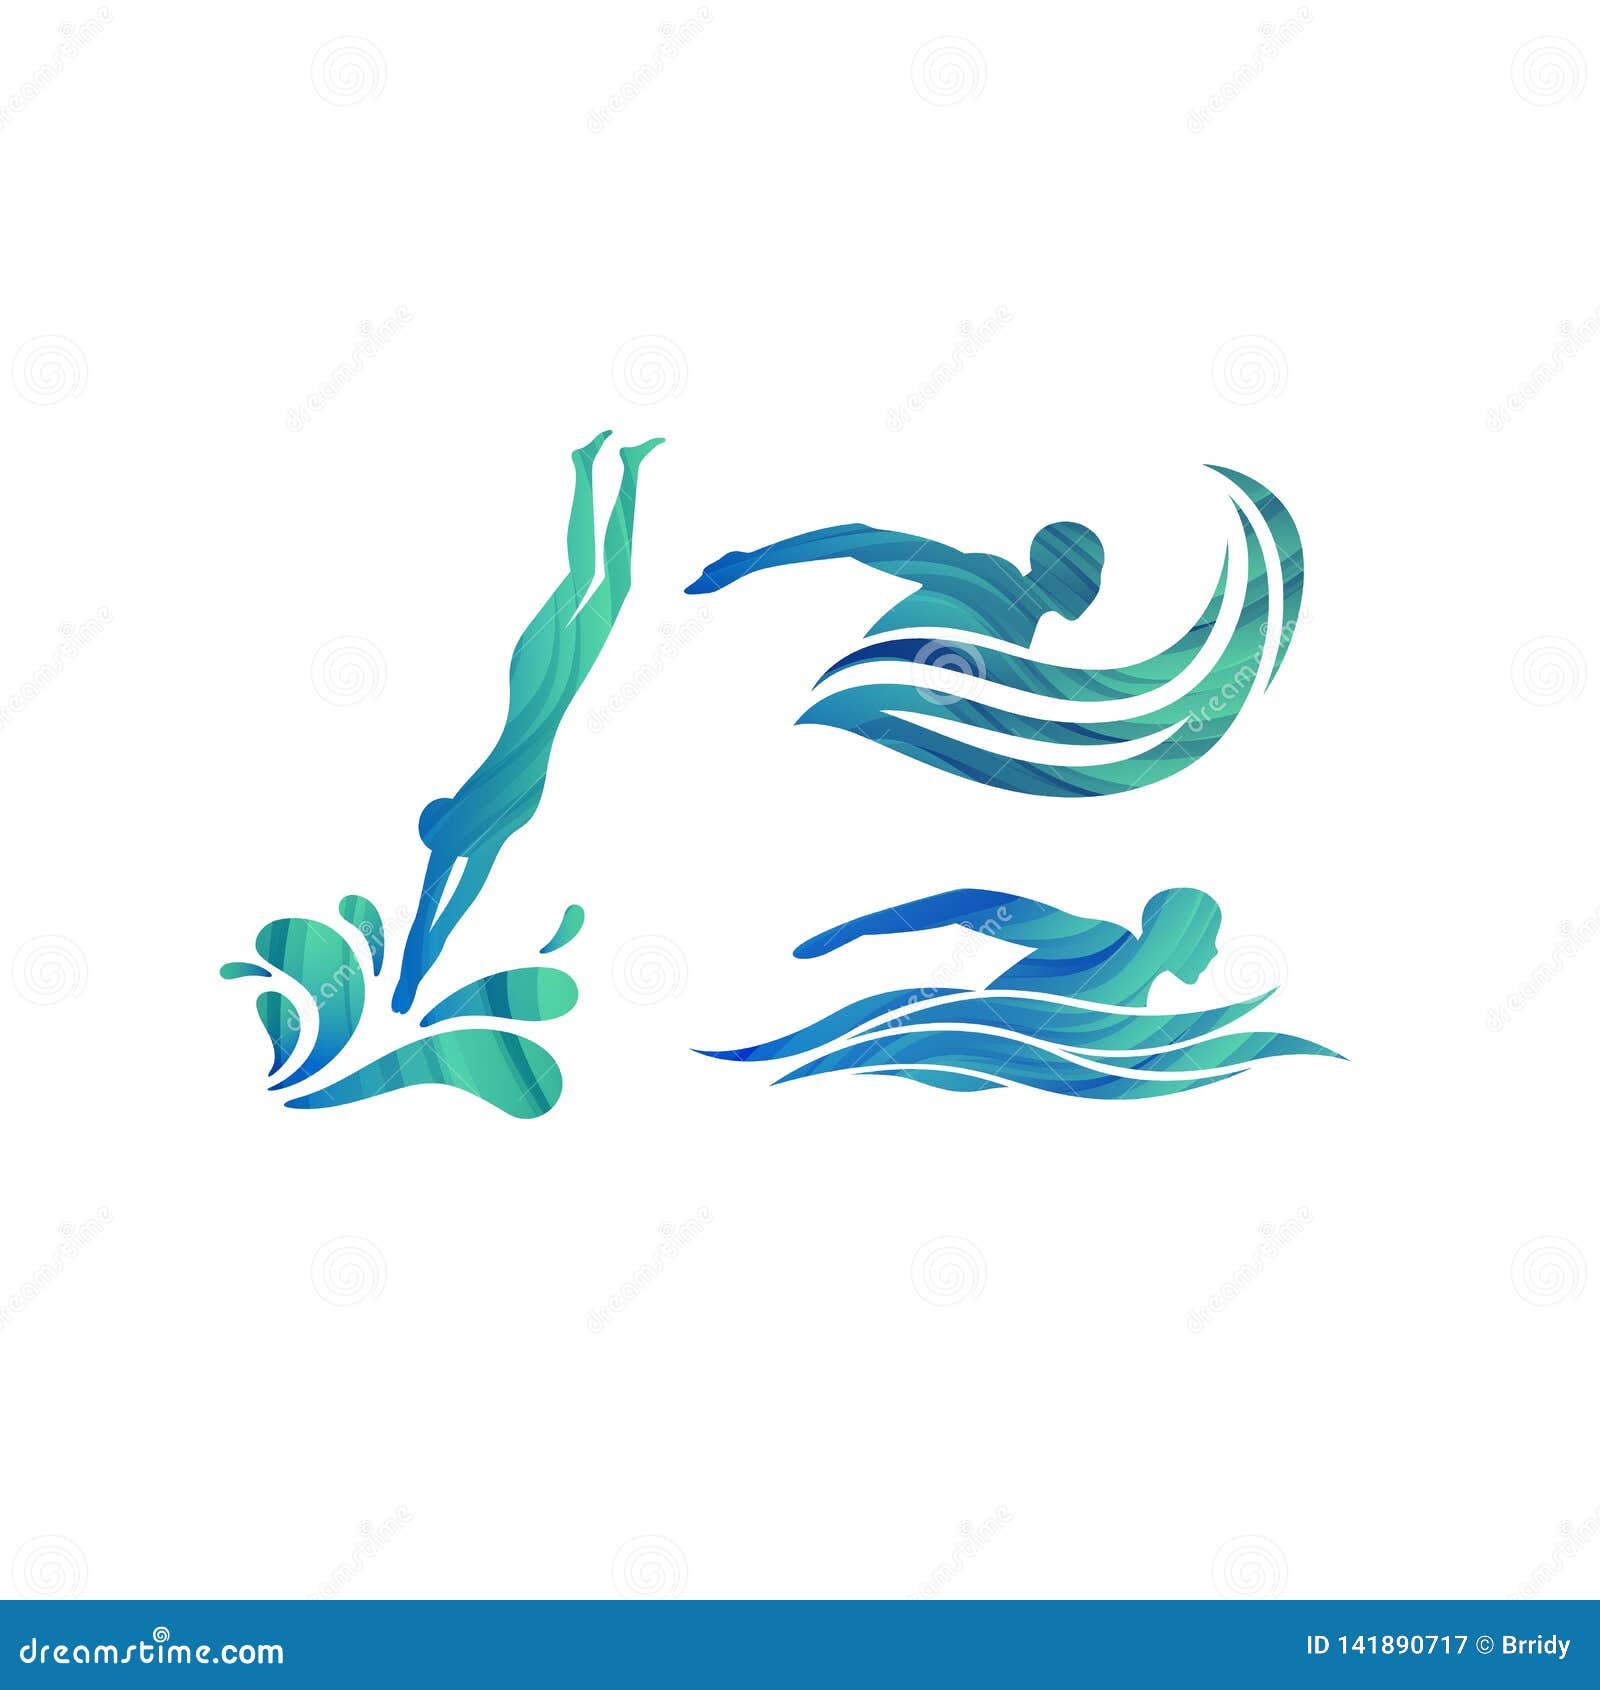  silhouettes of swimmers. concept for swimming pools logo, competitions icon and  for swim school.